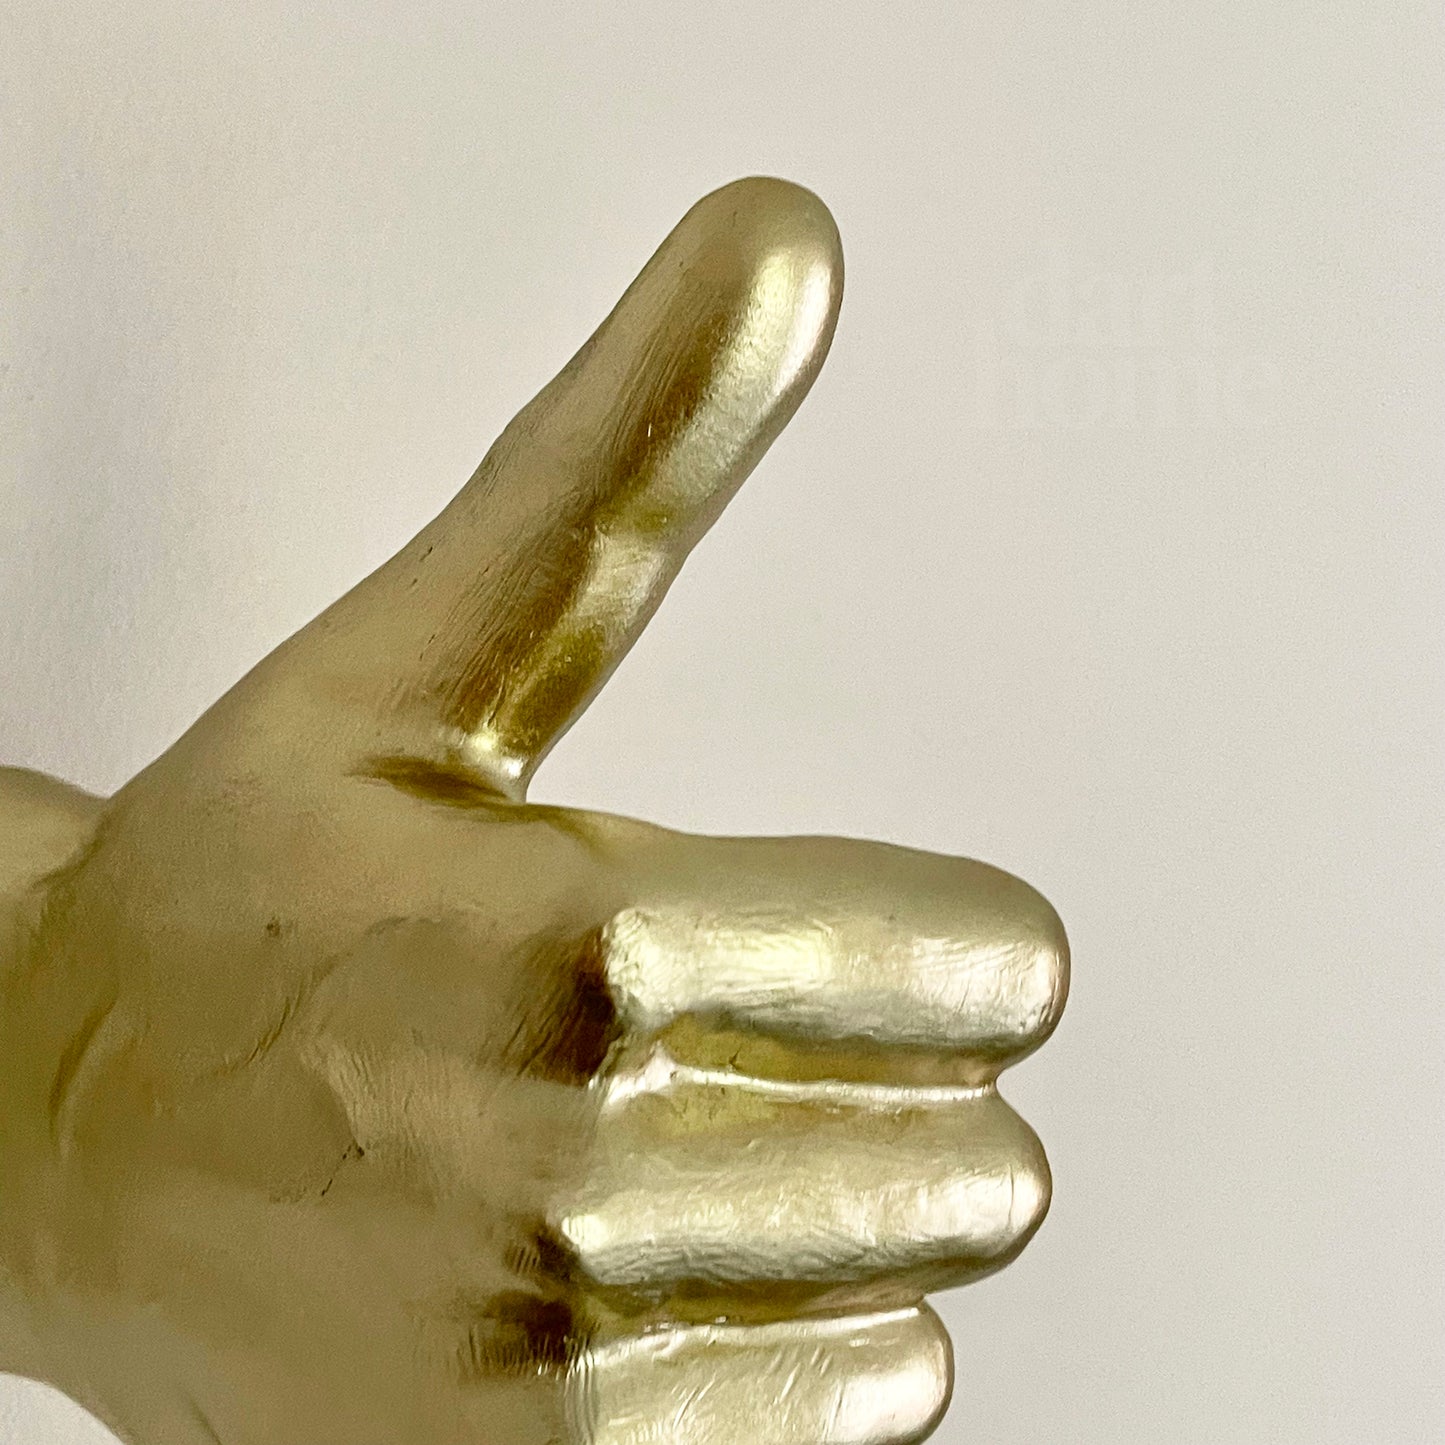 Gold Thumbs Up Wall Decoration